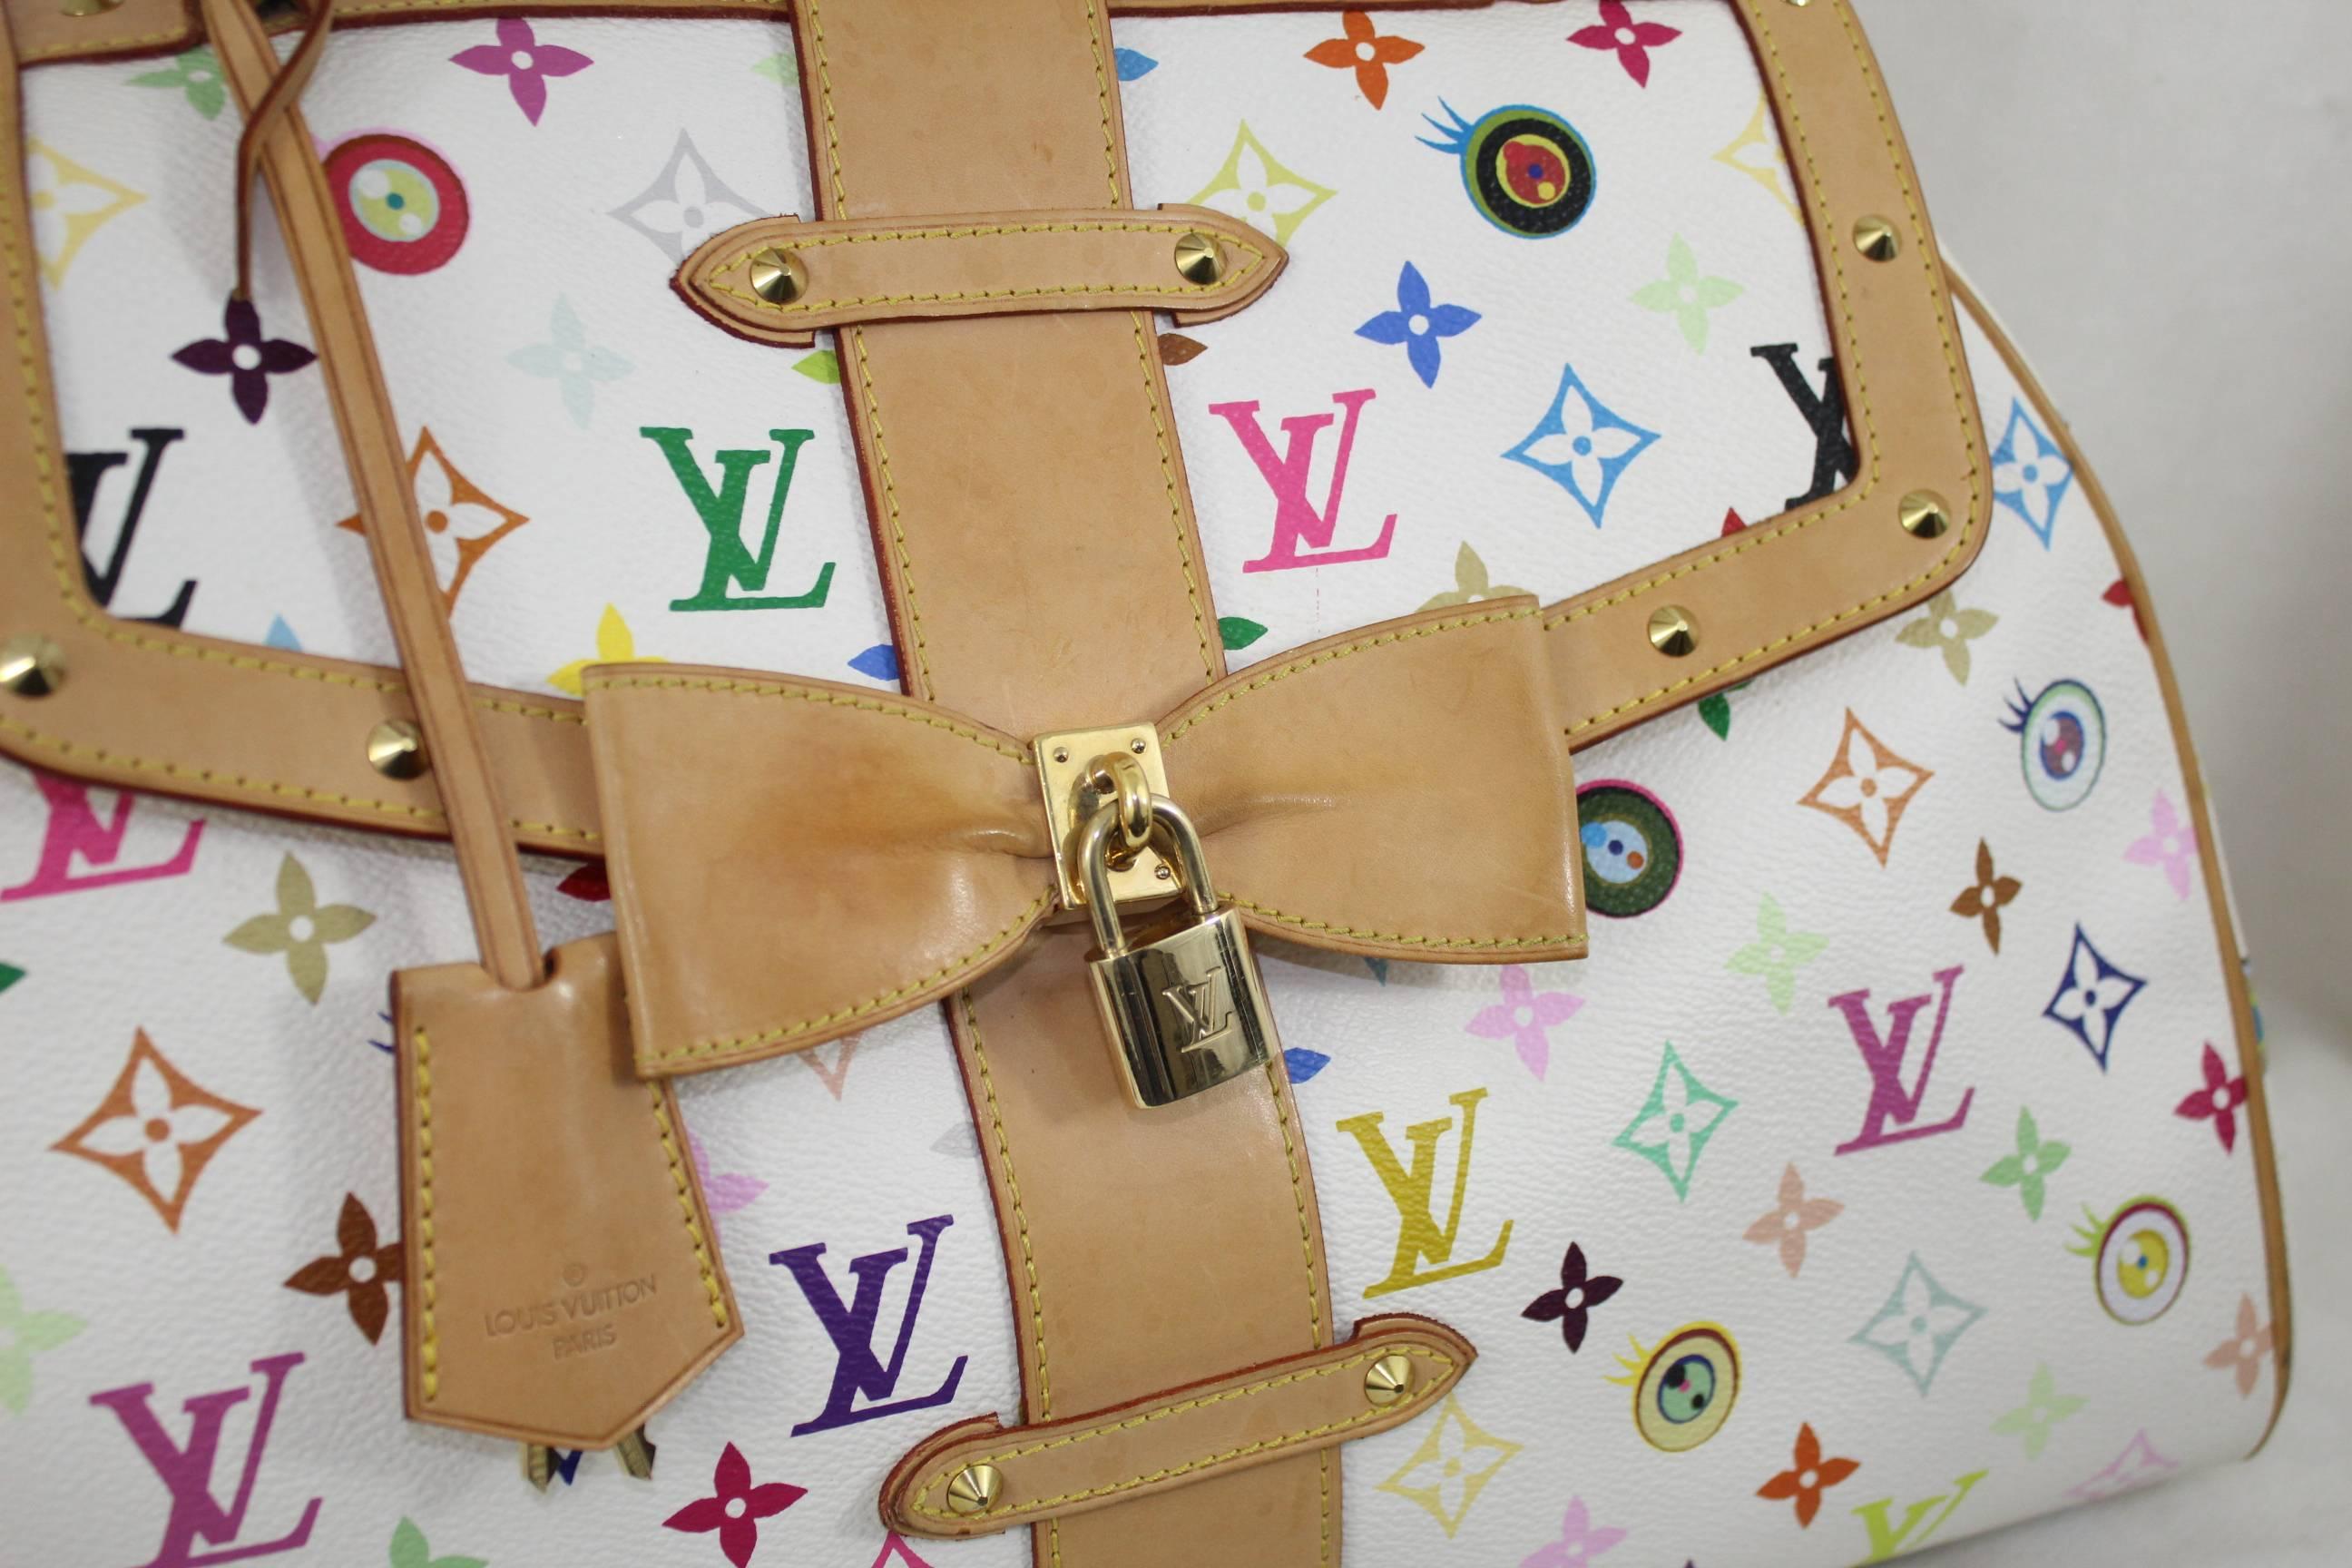 Nice handbag from louis Vuitton in collabooration with Murakamiu.  